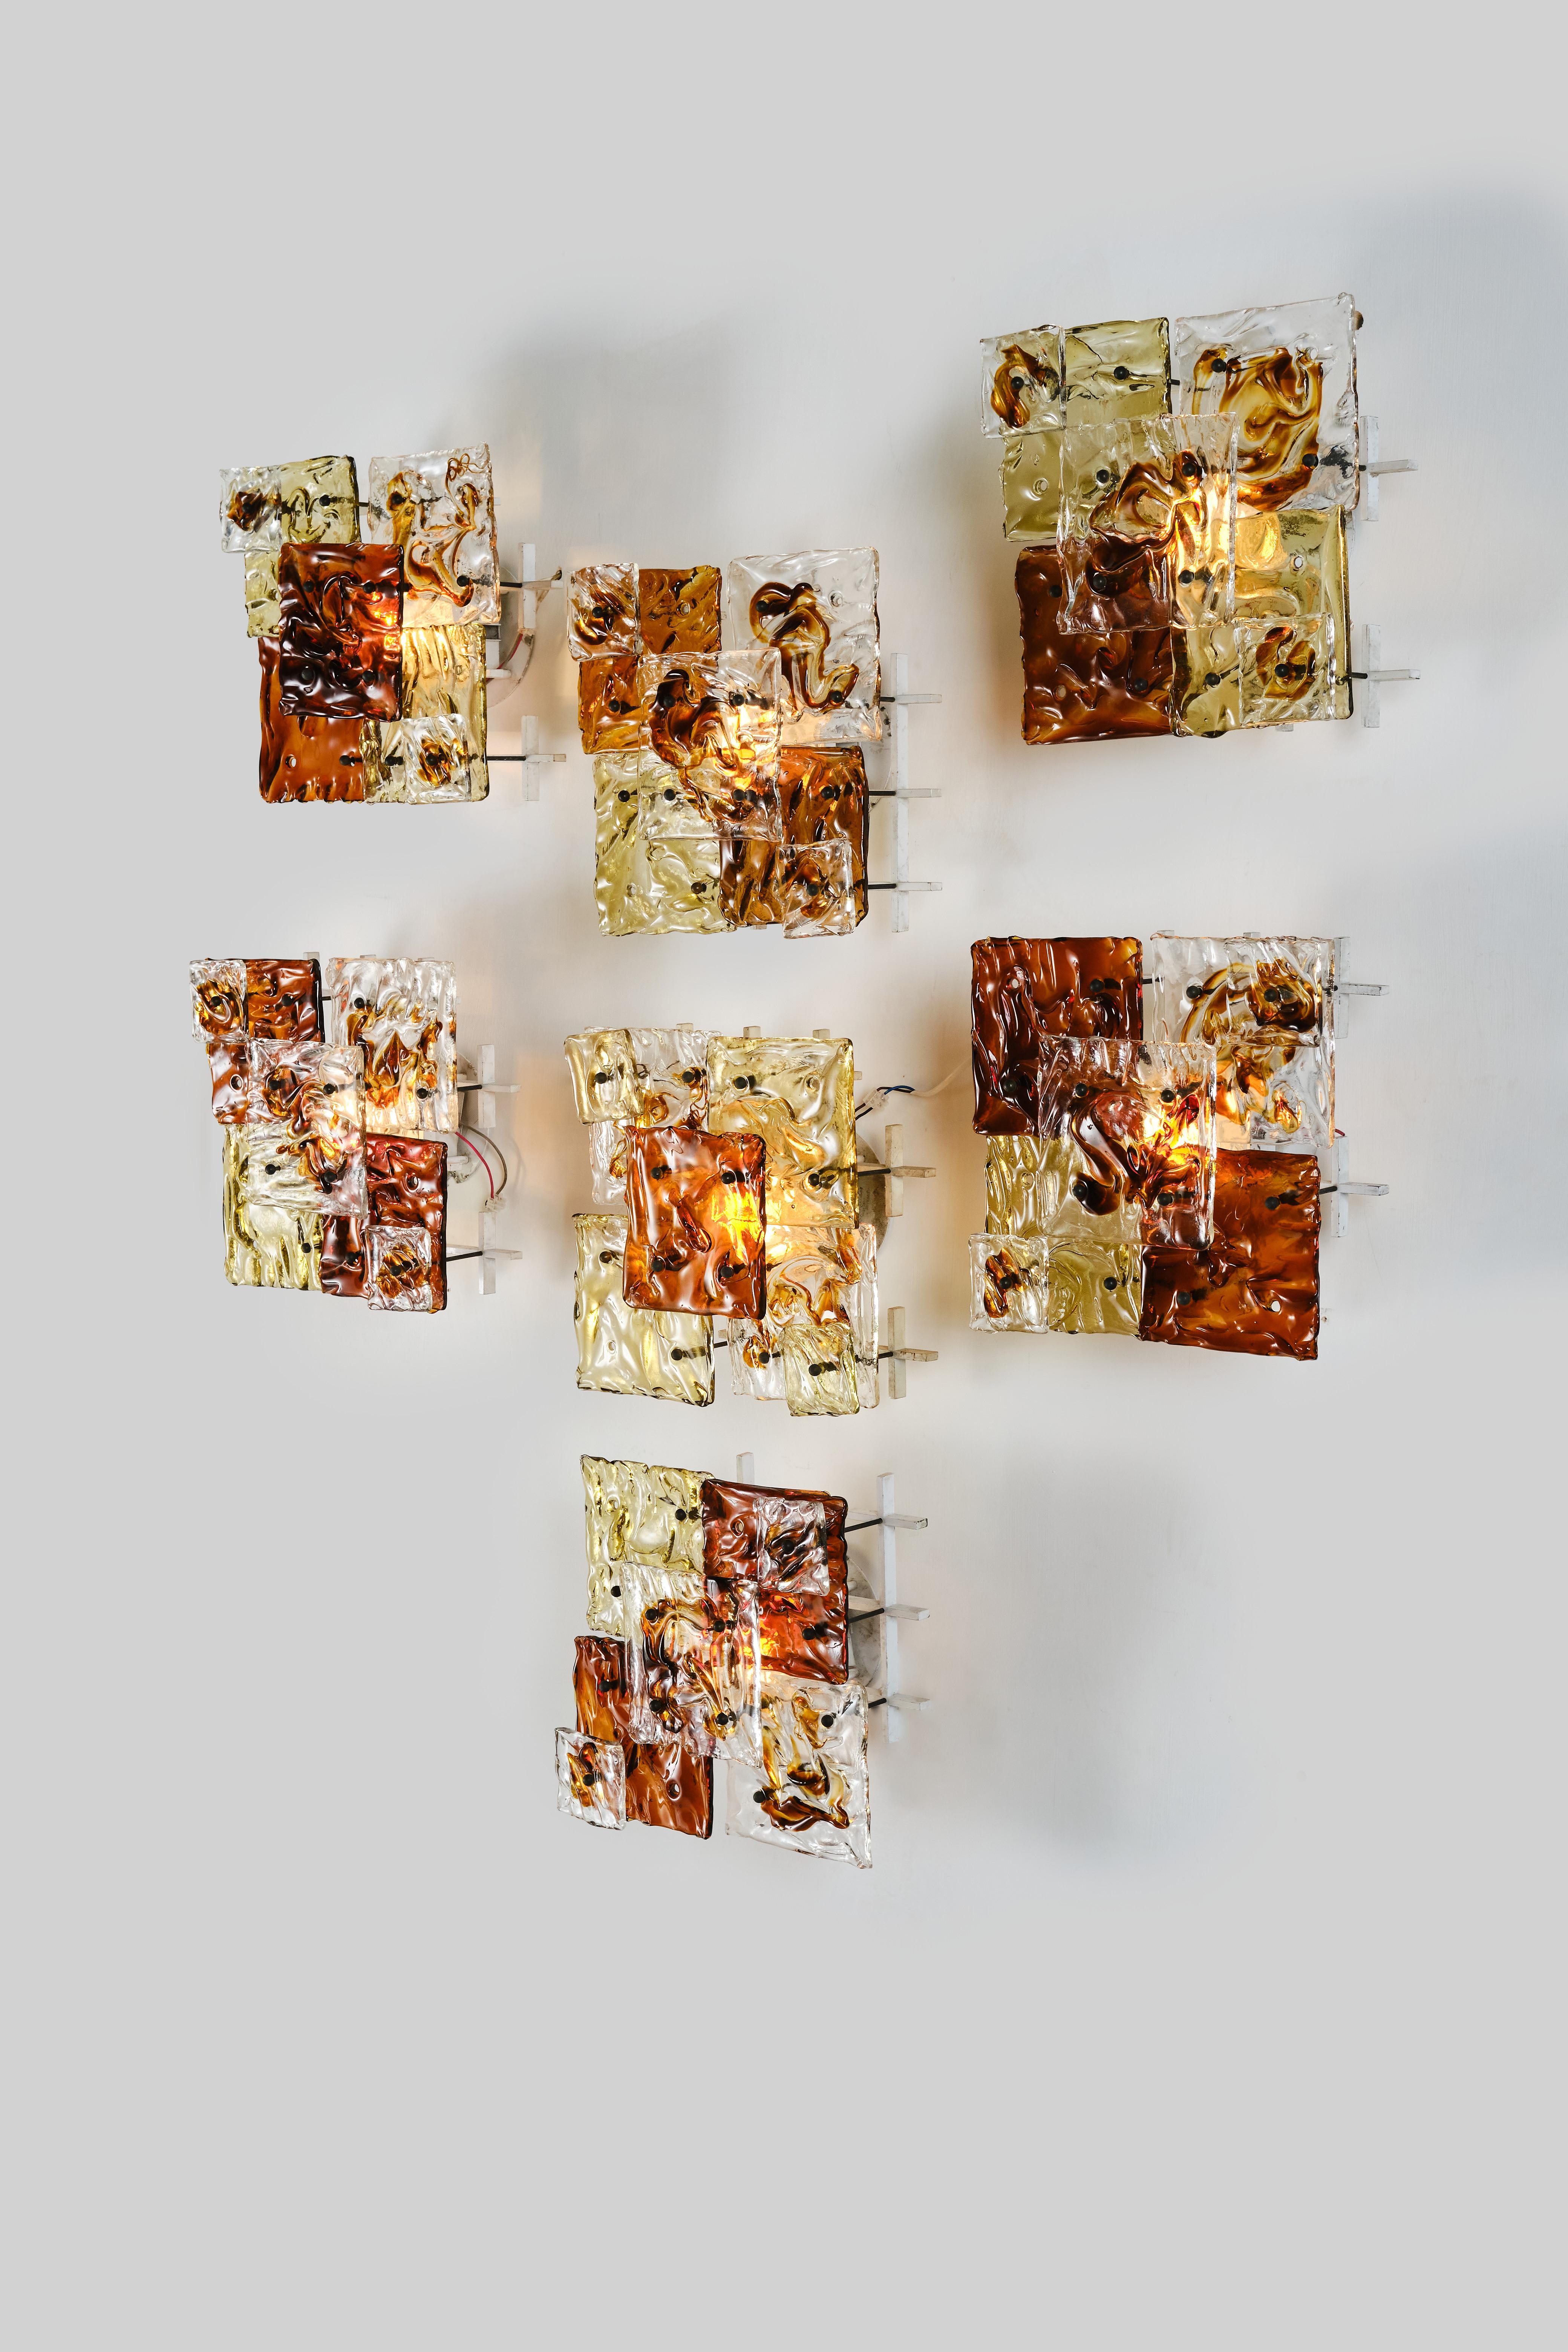 Set of seven incredible wall lights designed by Toni Zuccheri and produced by Venini Murano, model Patchwork.
These beautiful glass handmade sconces are a true work of art thanks to its hot-worked transparent glass, painted metal frame and brass